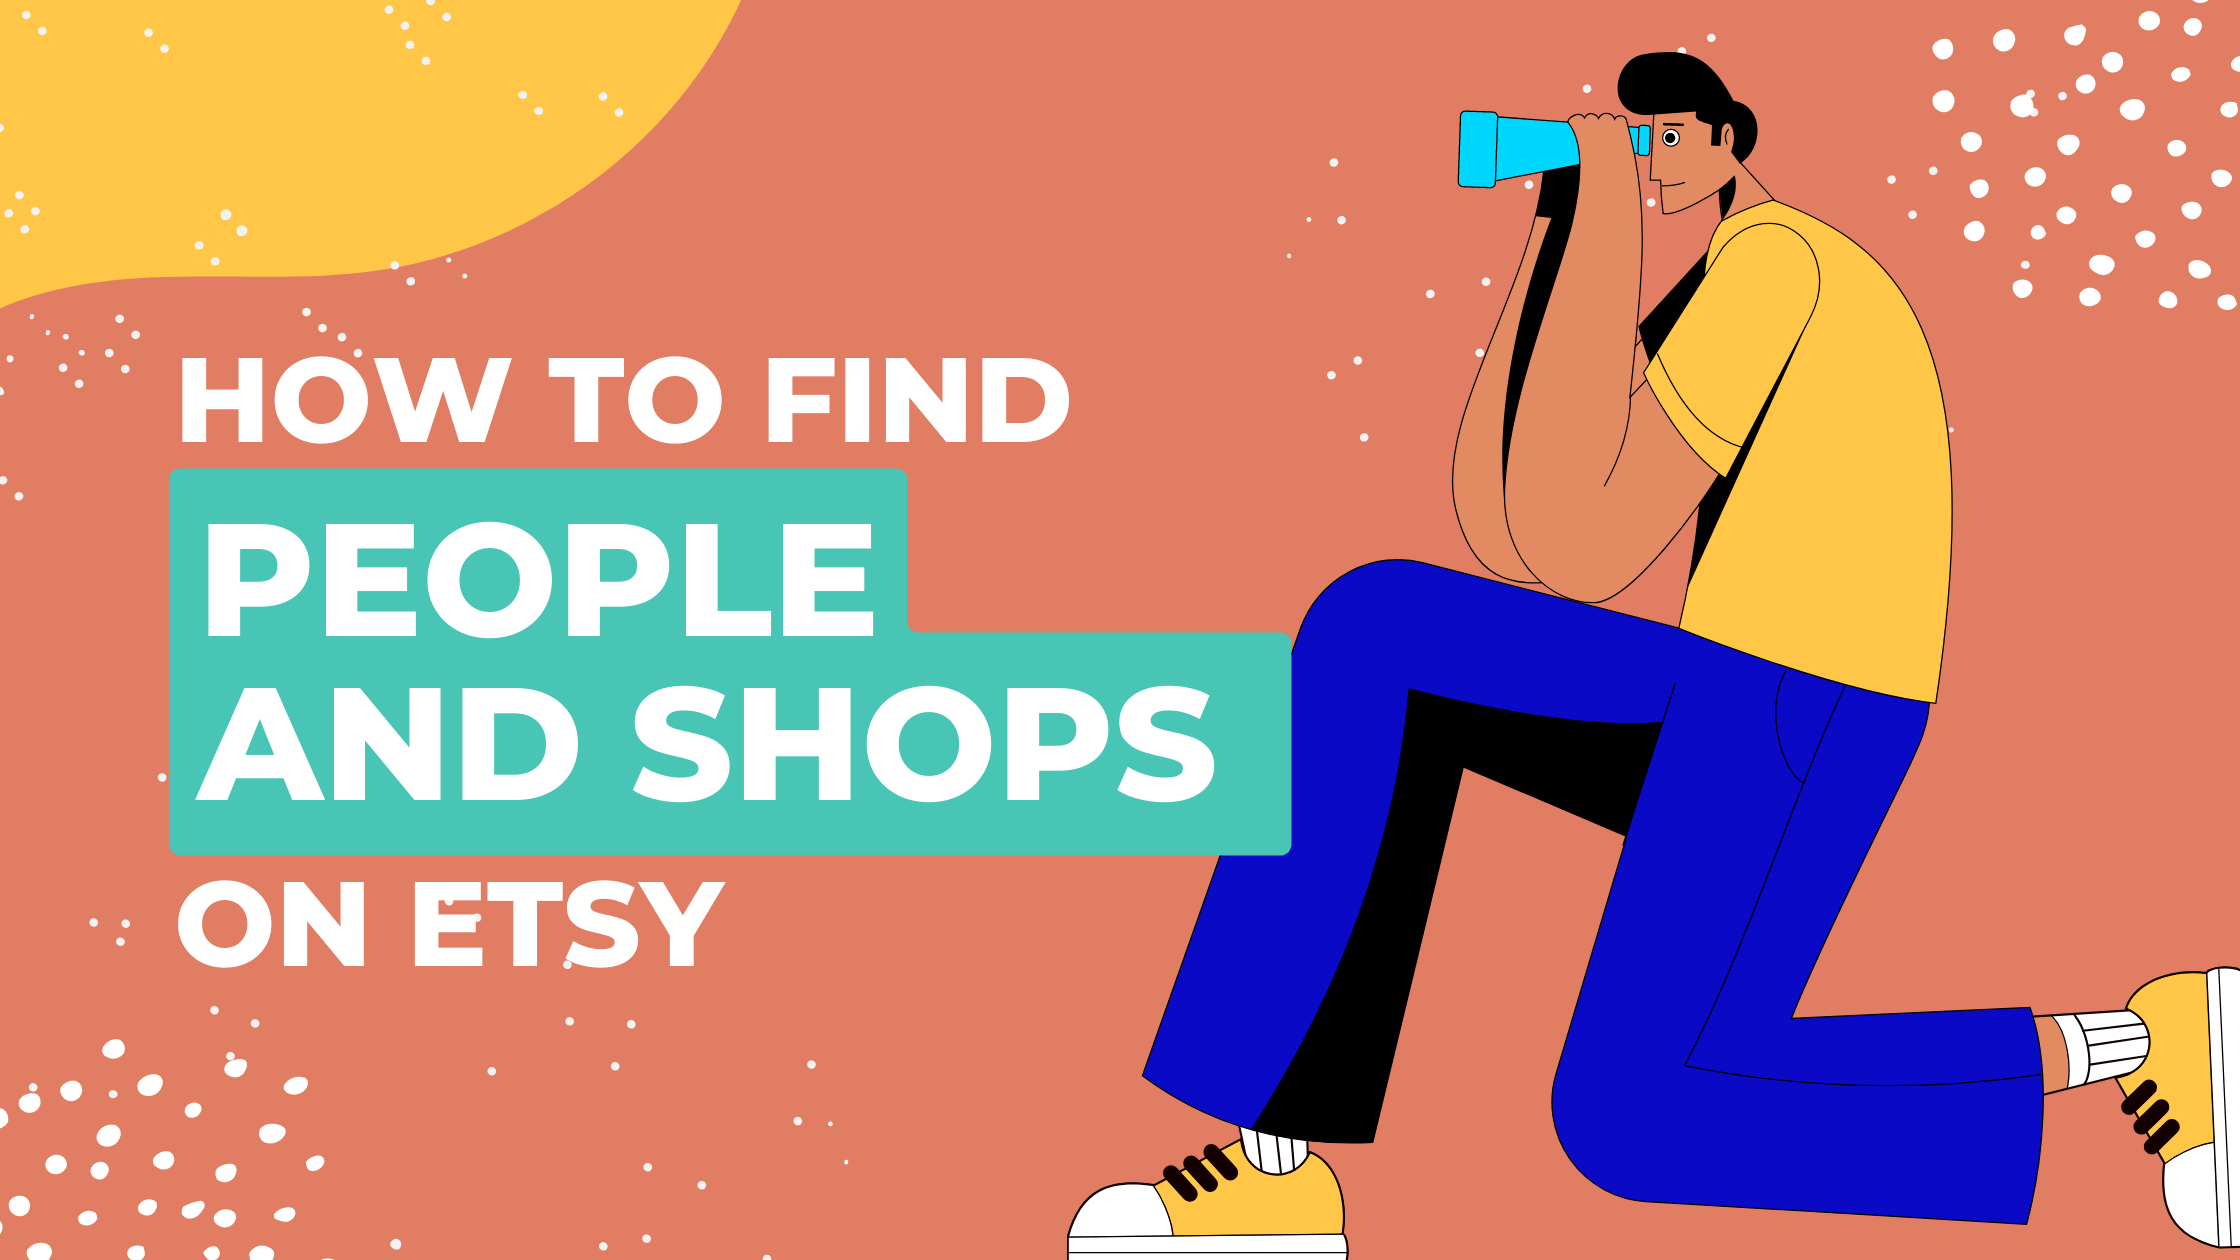 How To Find People And Shops On Etsy